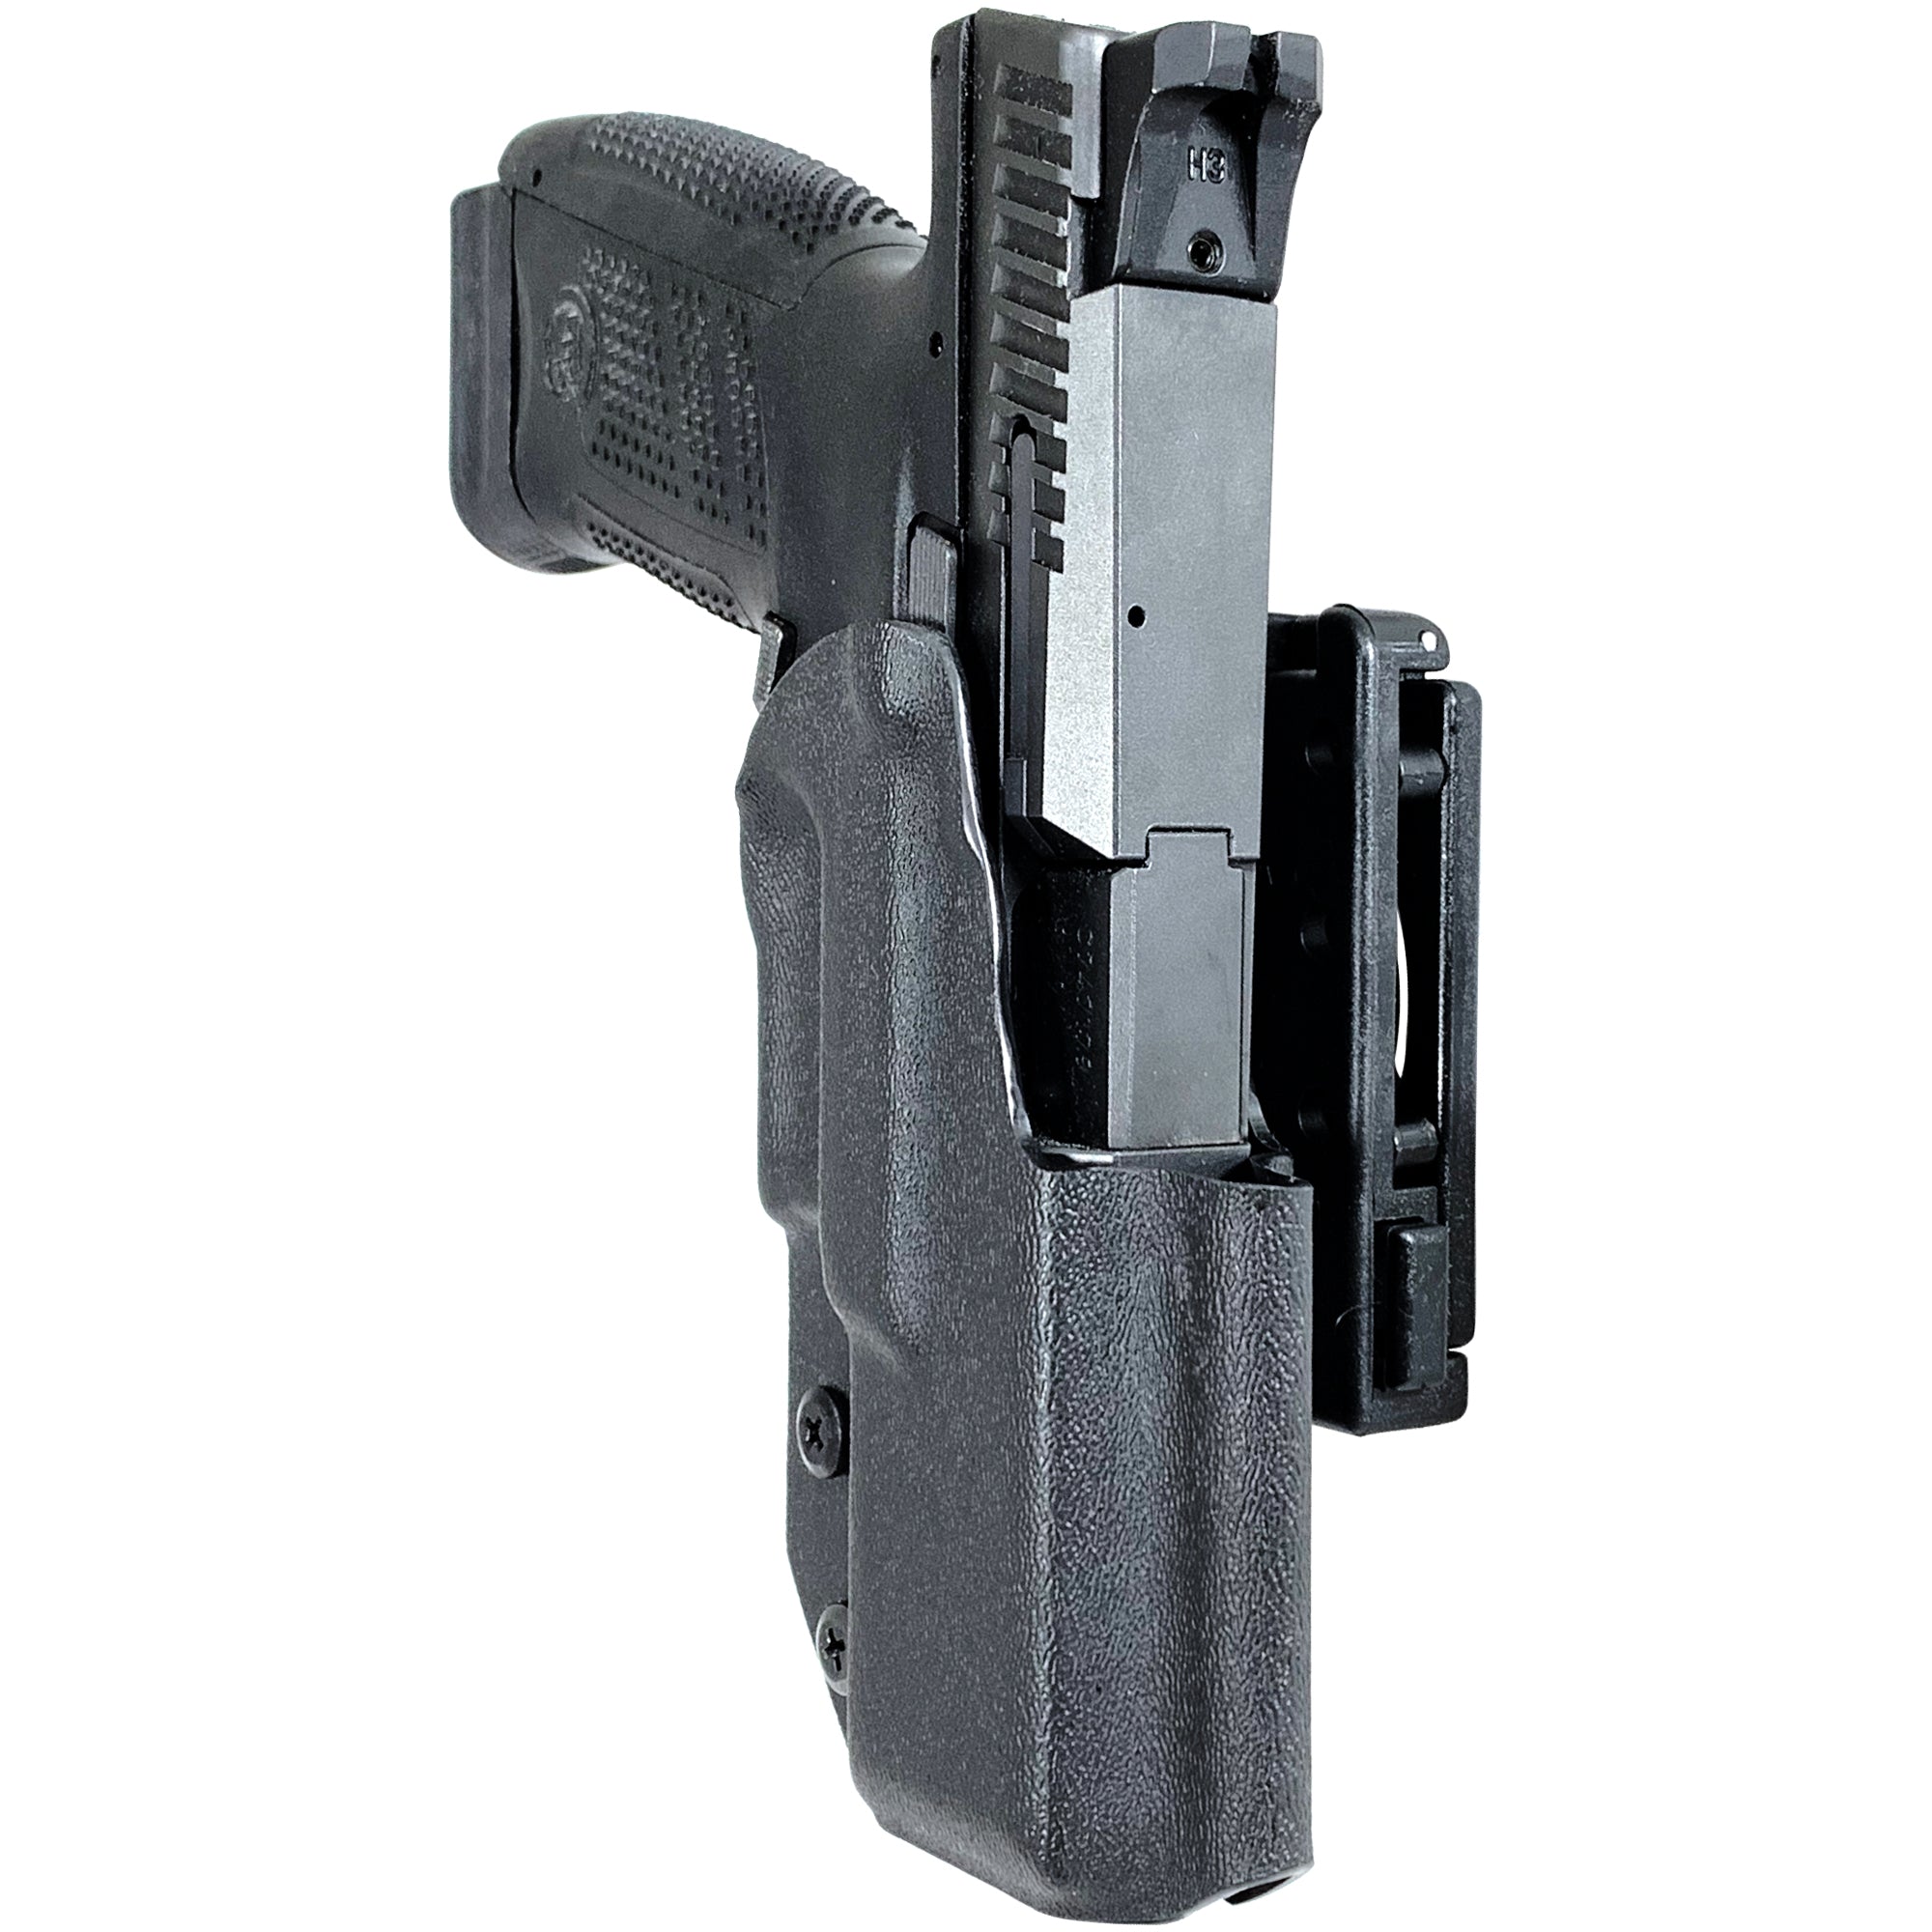 CZ P-10 C Pro IDPA Competition Holster